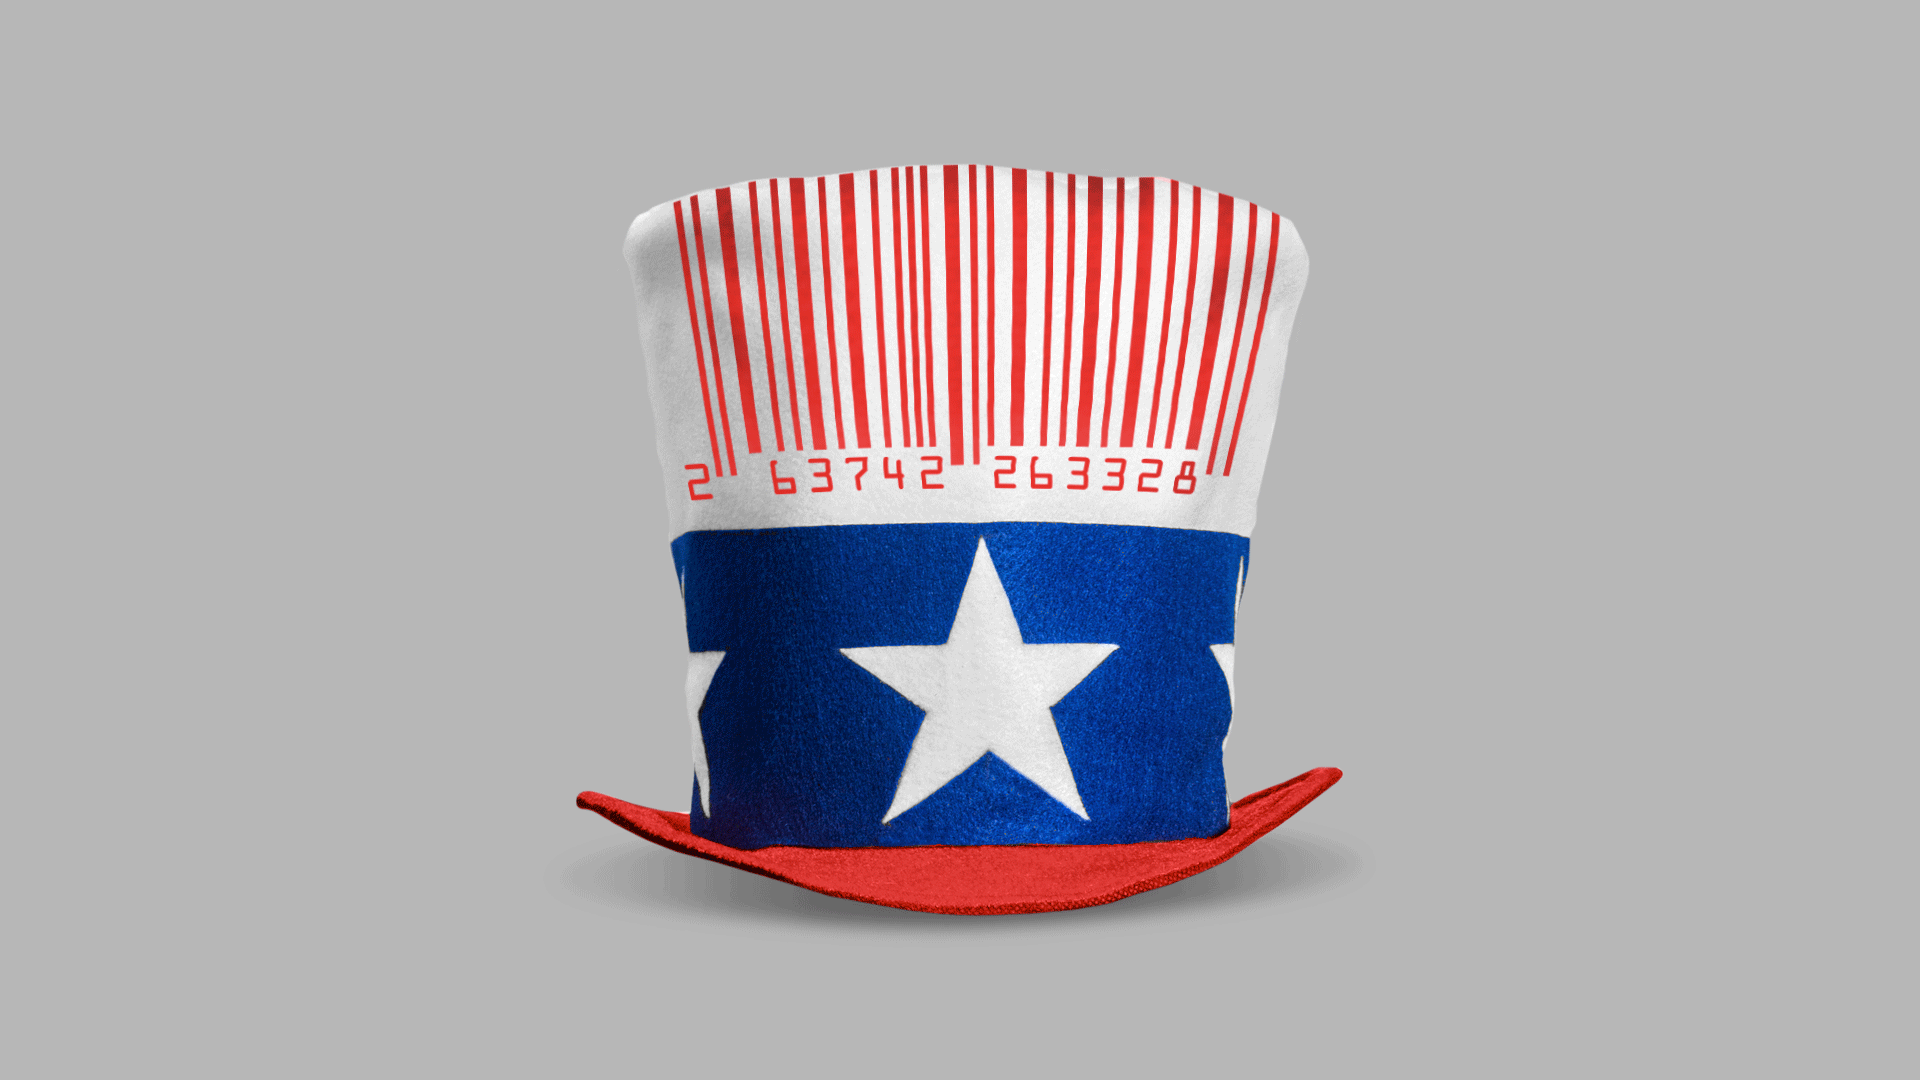 In this illustration, a USA themed top hat is adorned with a bar code.